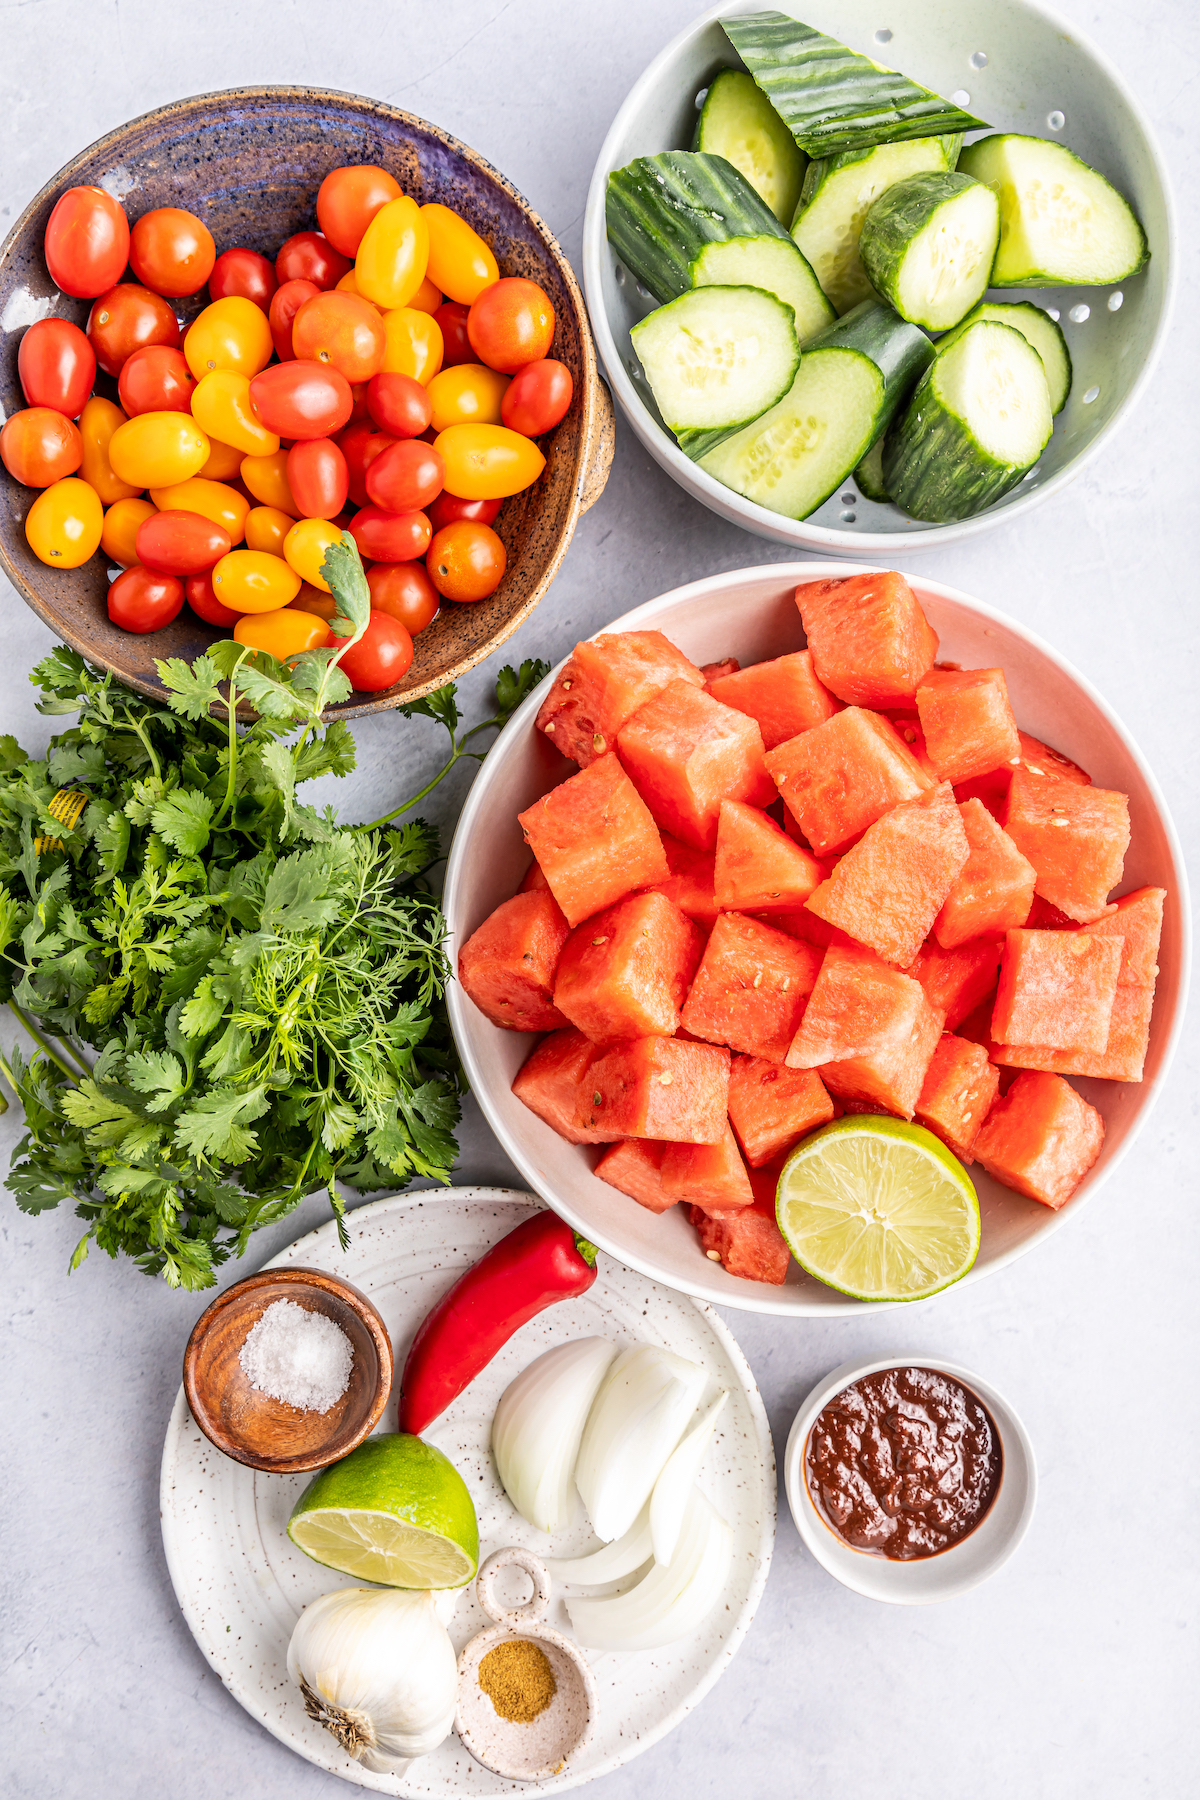 All the ingredients to make watermelon gazpacho in small prep bowls or plates.